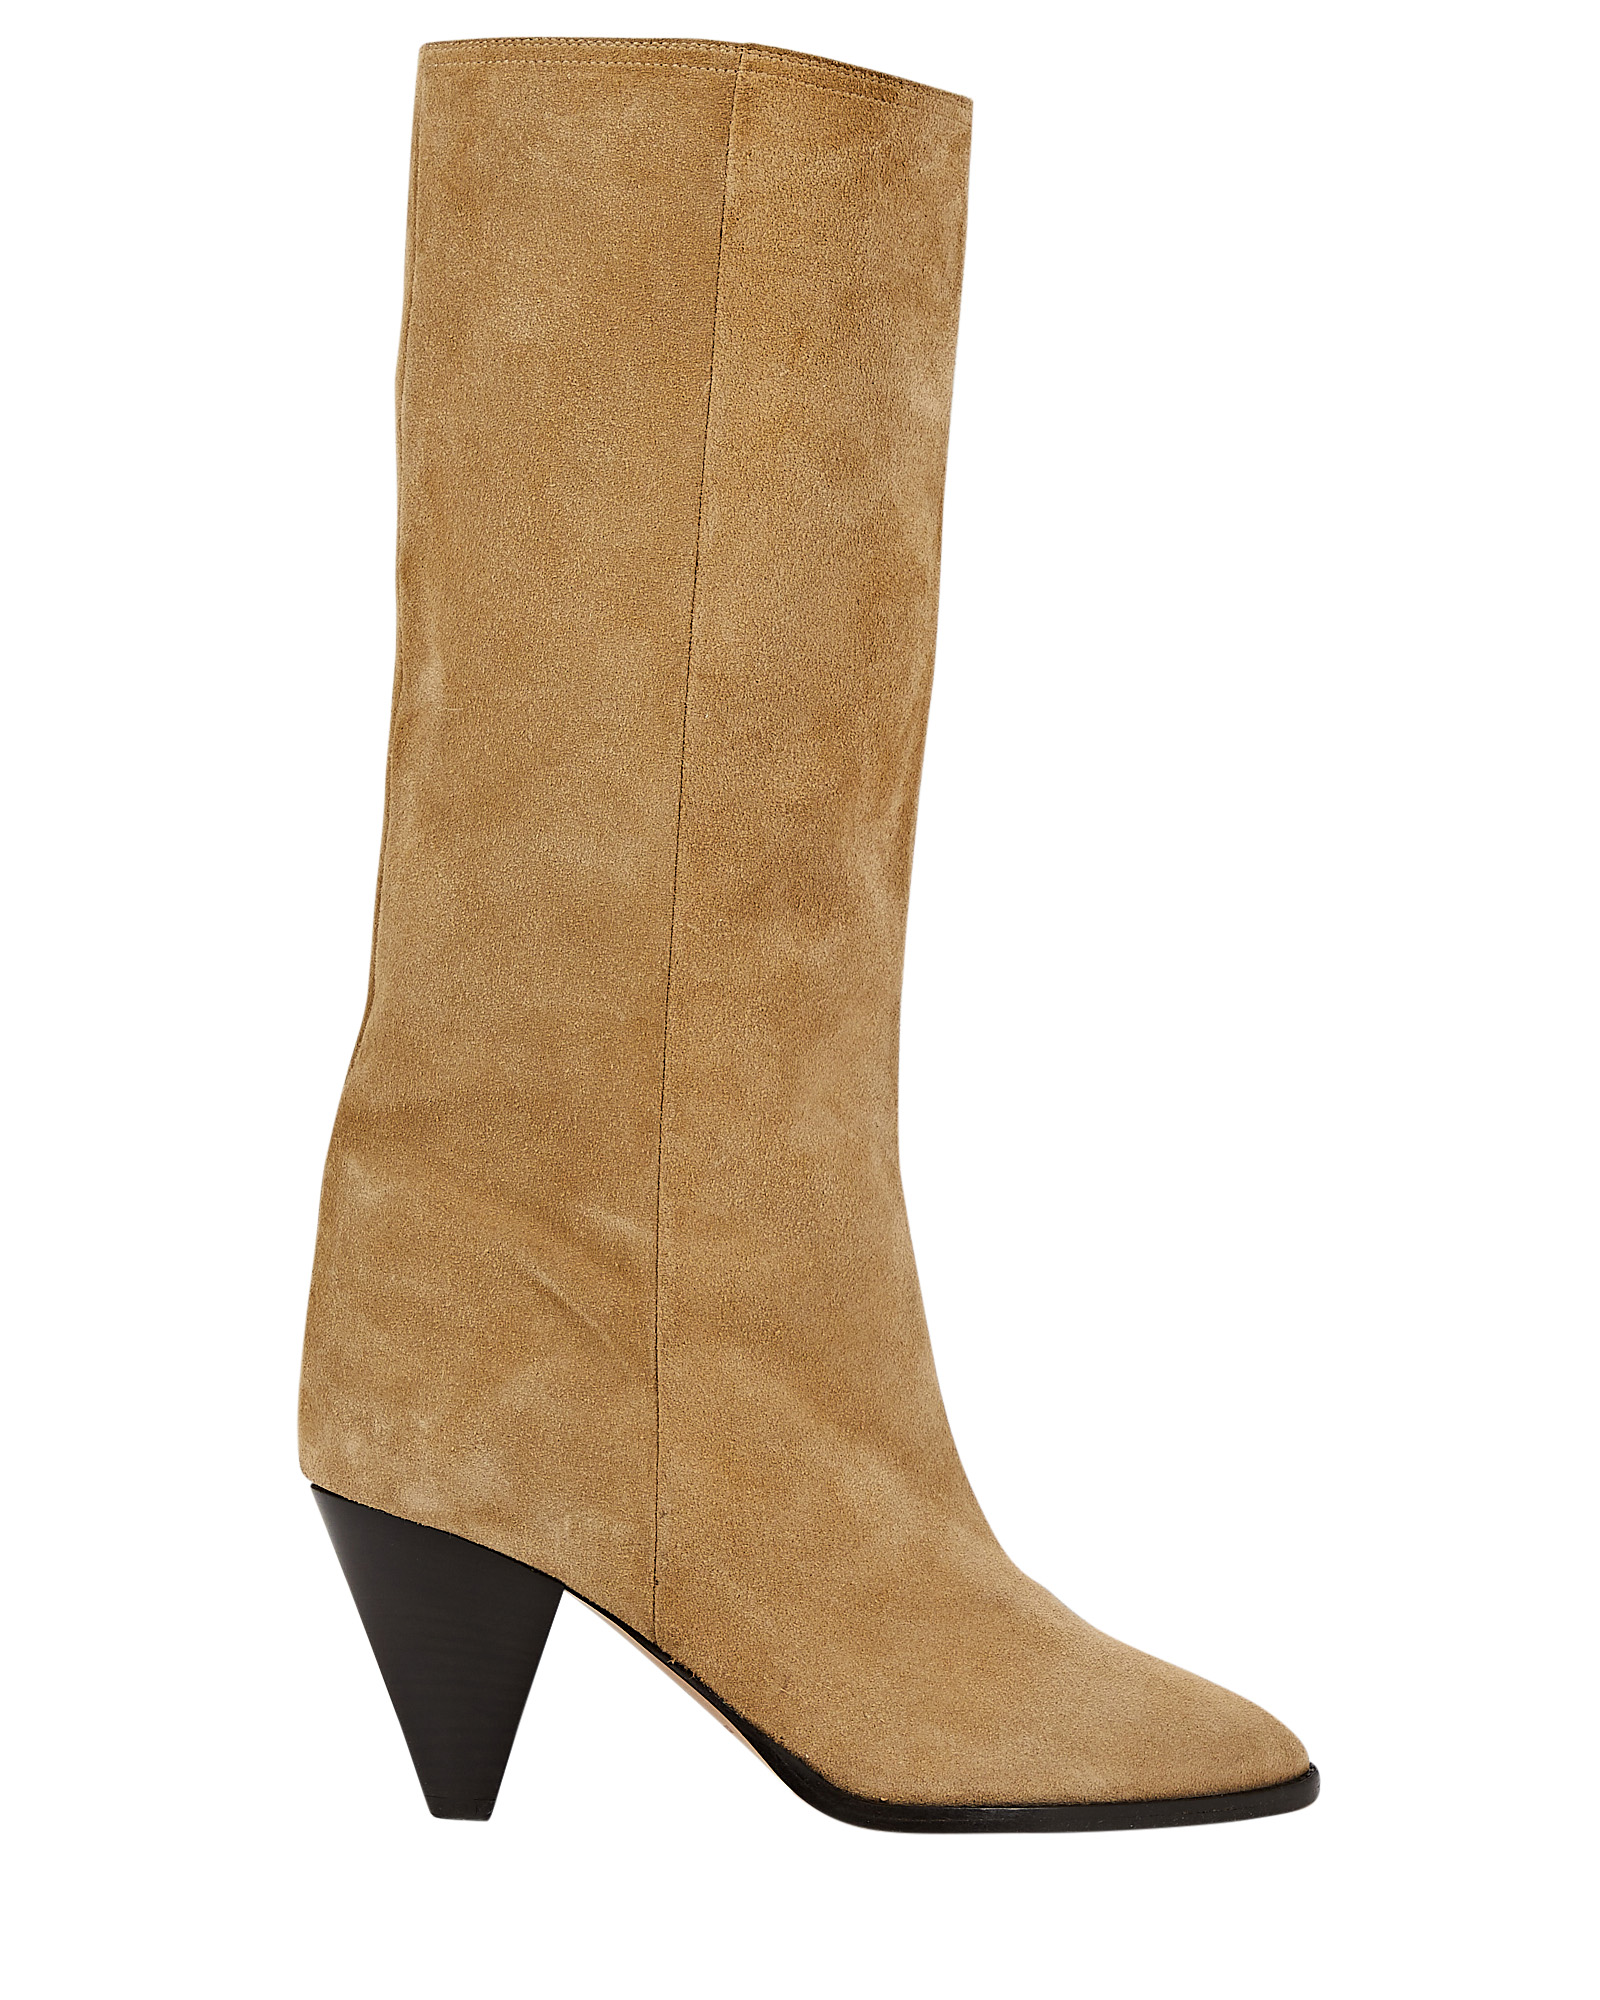 ISABEL MARANT ROUXY SUEDE MID-CALF BOOTS